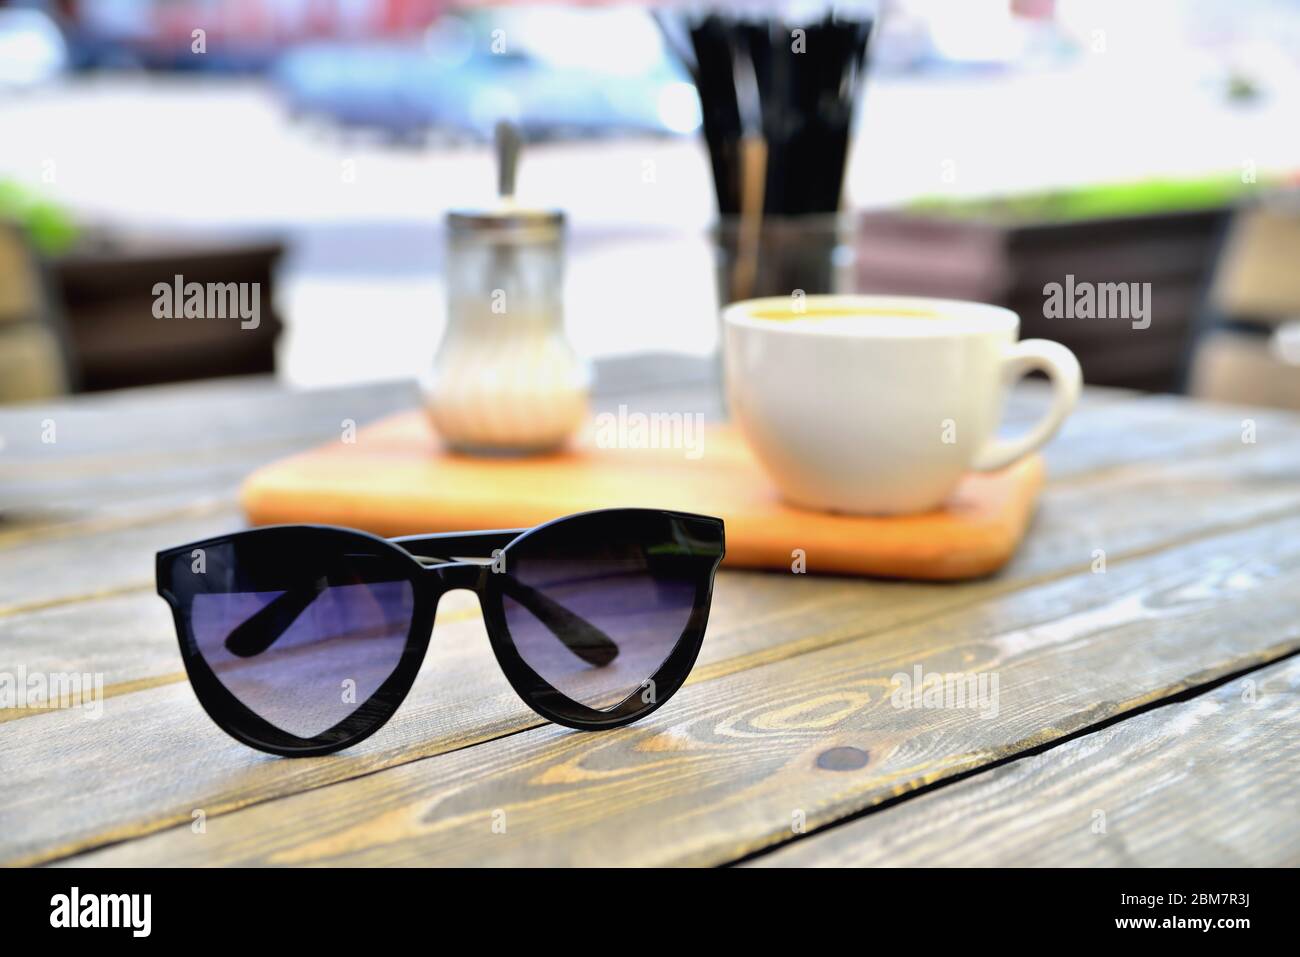 cup of coffee on a wooden stand is on the table in a cafe summer morning, sunglasses in the foreground, close-up Stock Photo